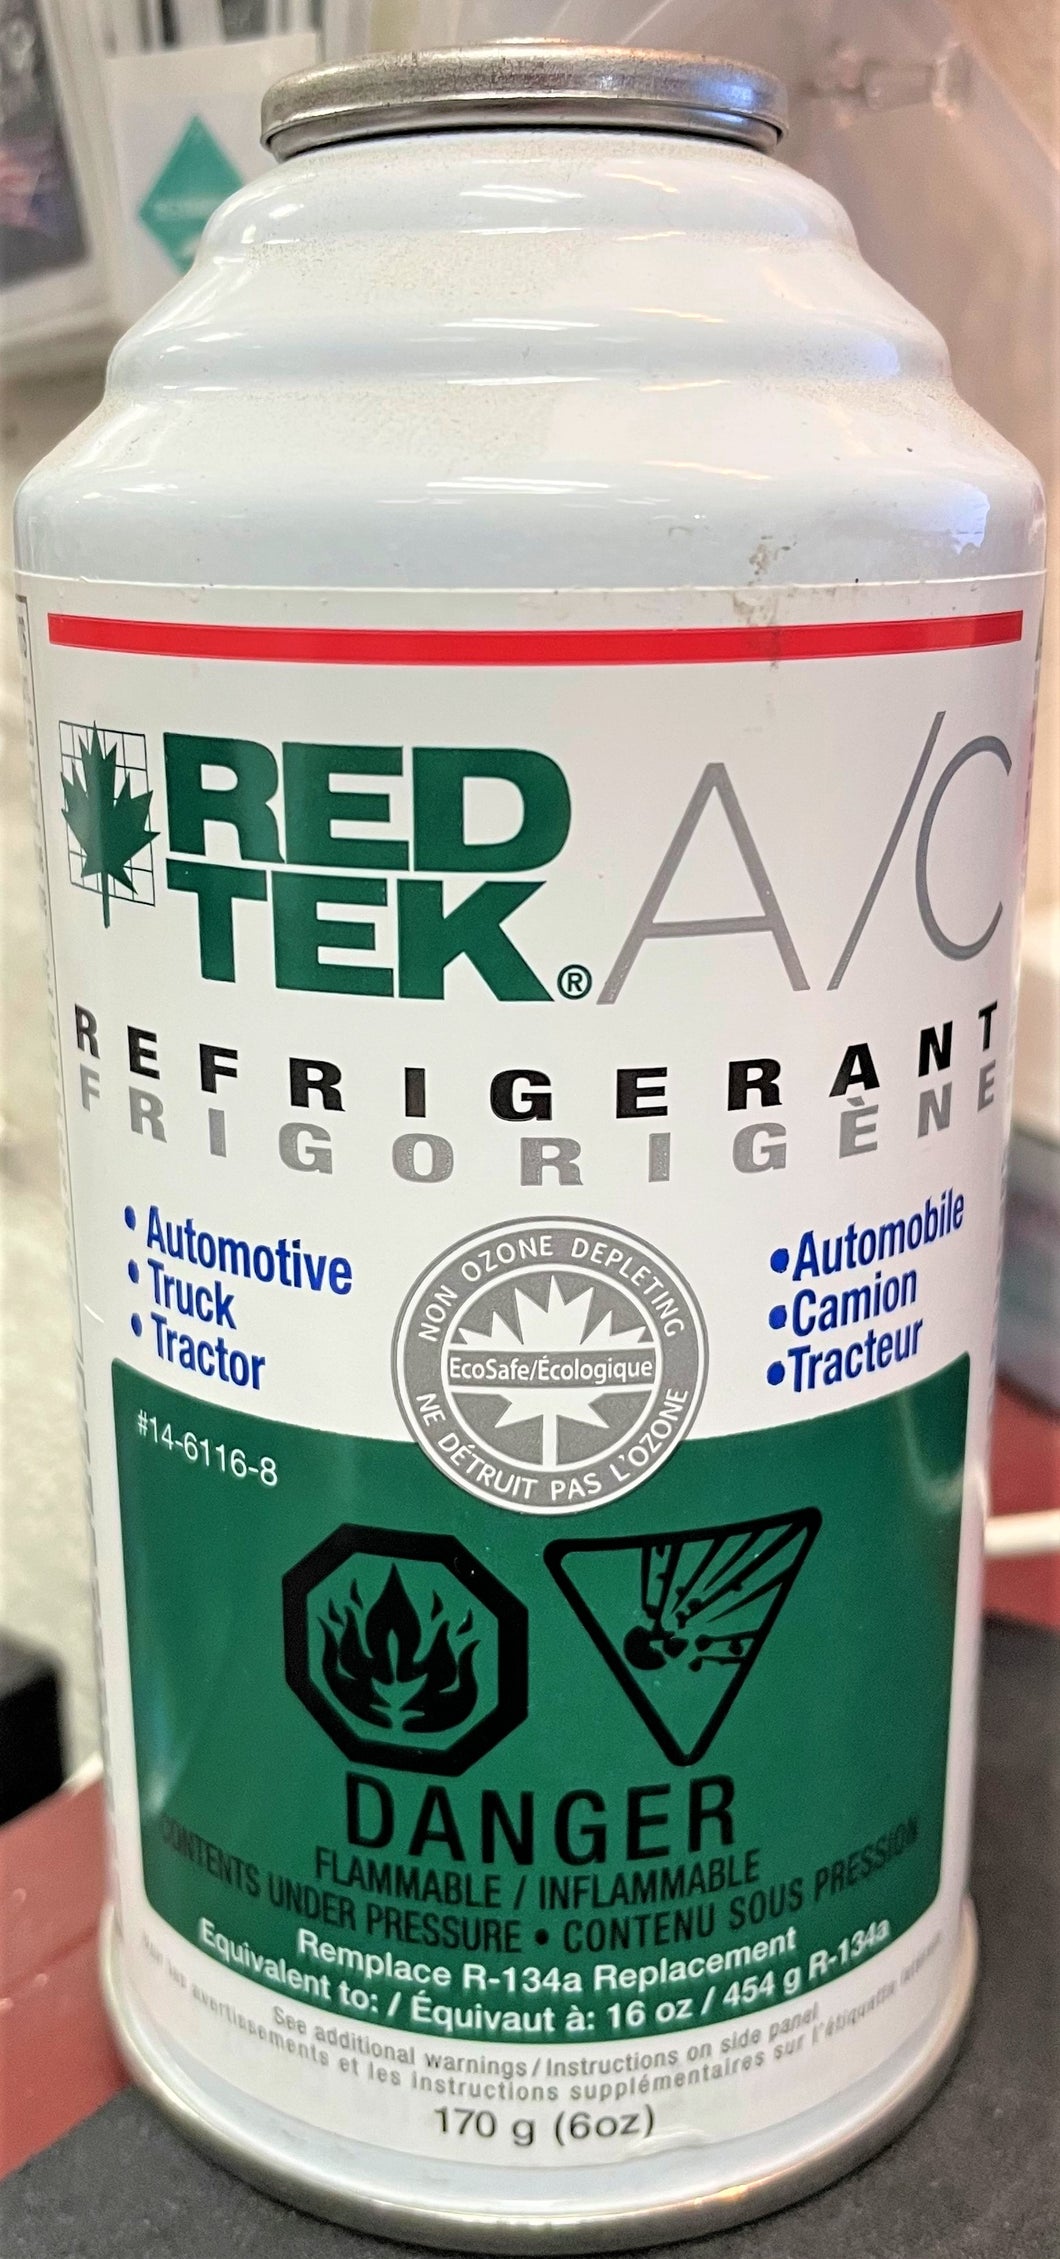 RED TEK Refrigerant 6 oz. Can R134a Replacement Made in USA